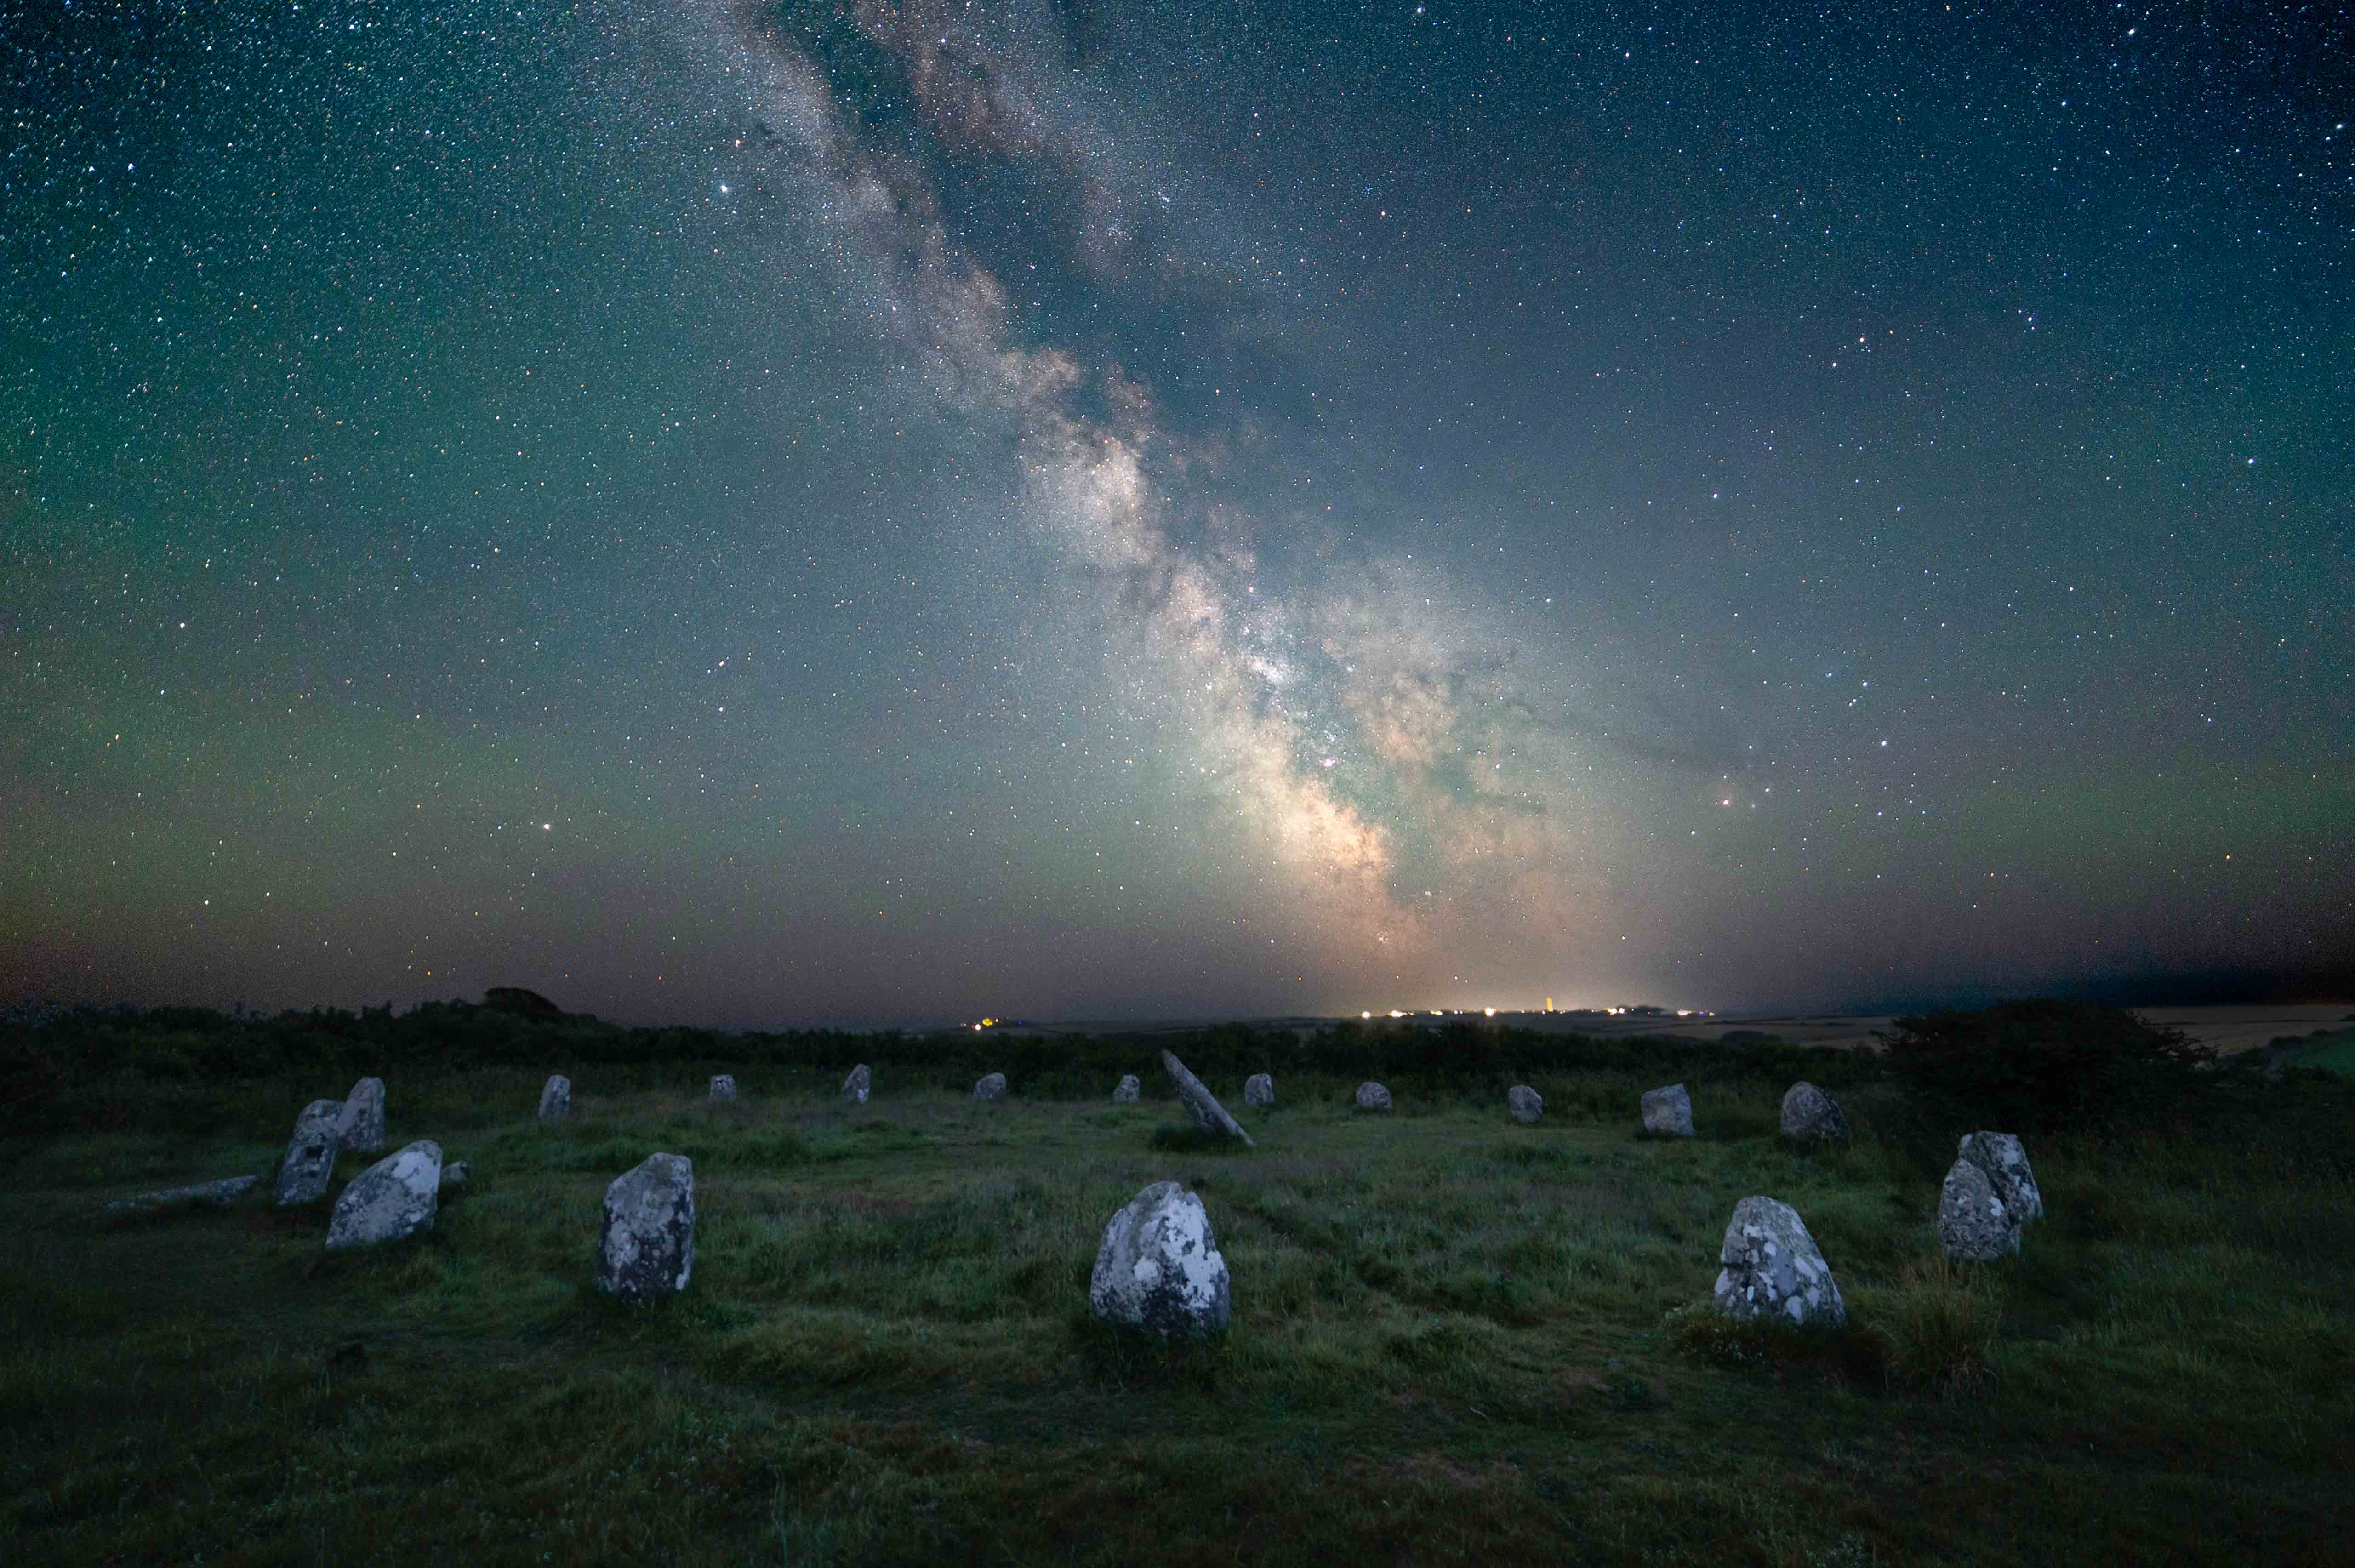 Night sky image over circle of stones